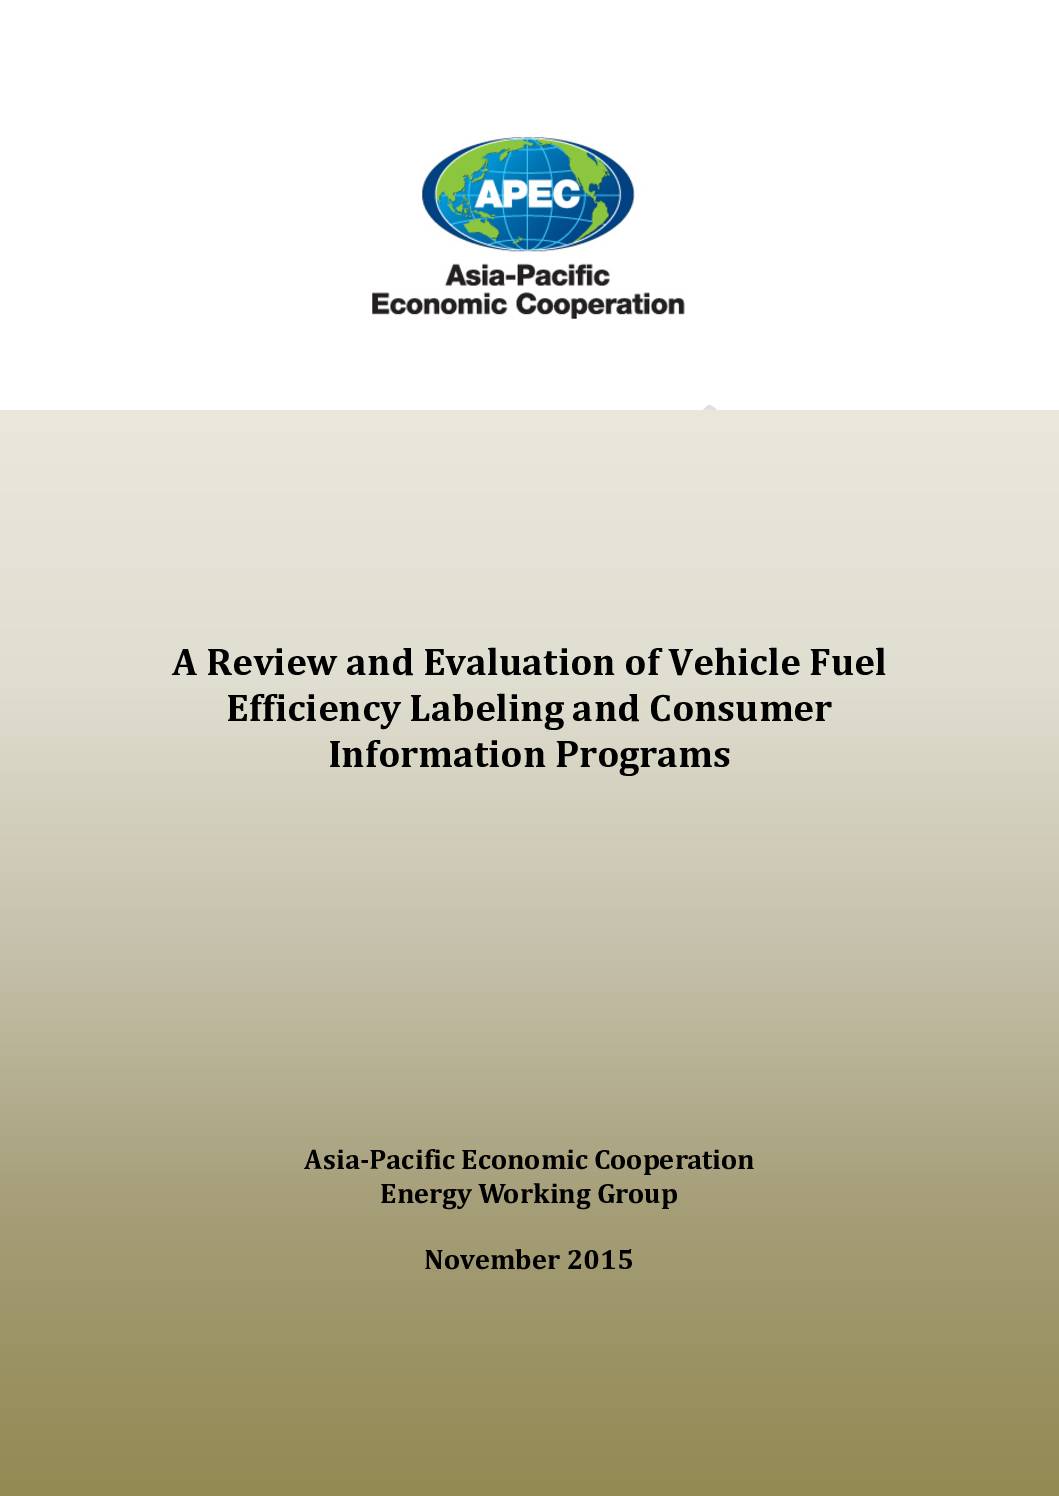 A Review and Evaluation of Vehicle Fuel Efficiency Labeling and Consumer Information Programs